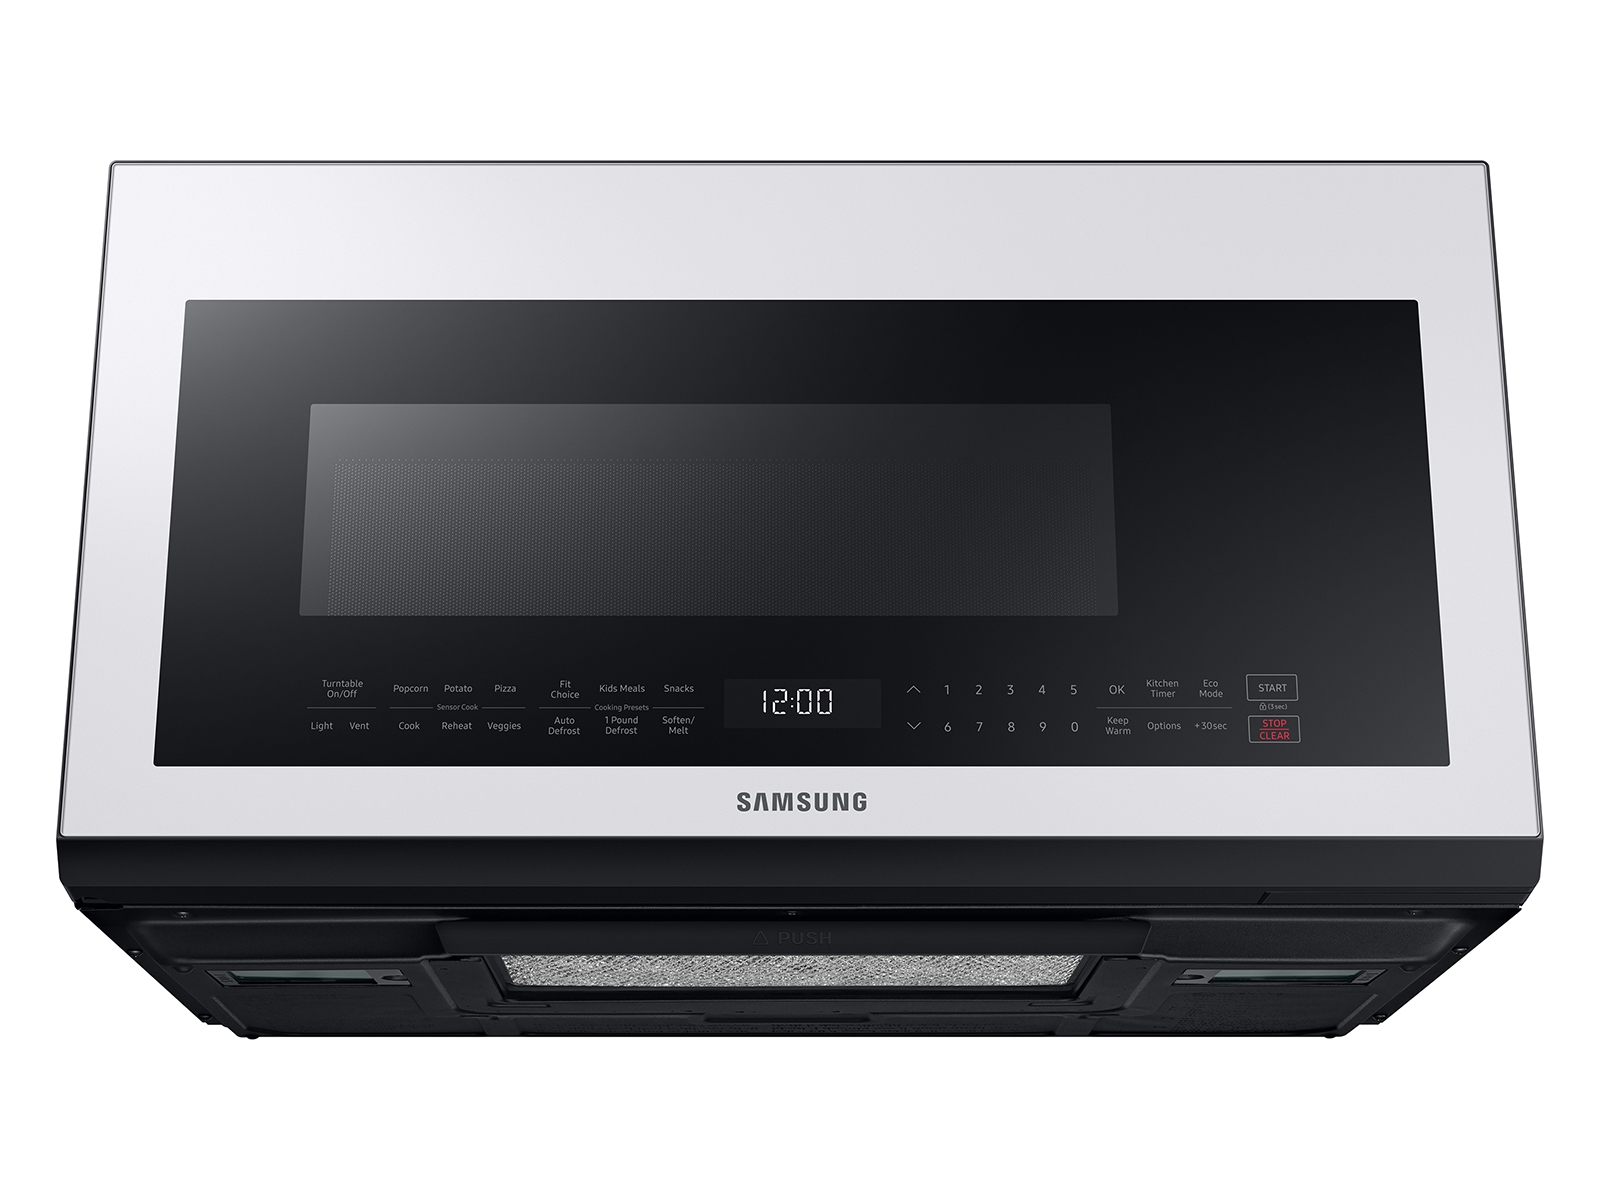 Thumbnail image of Bespoke Over-the-Range Microwave 2.1 cu. ft. with Sensor Cooking in White Glass